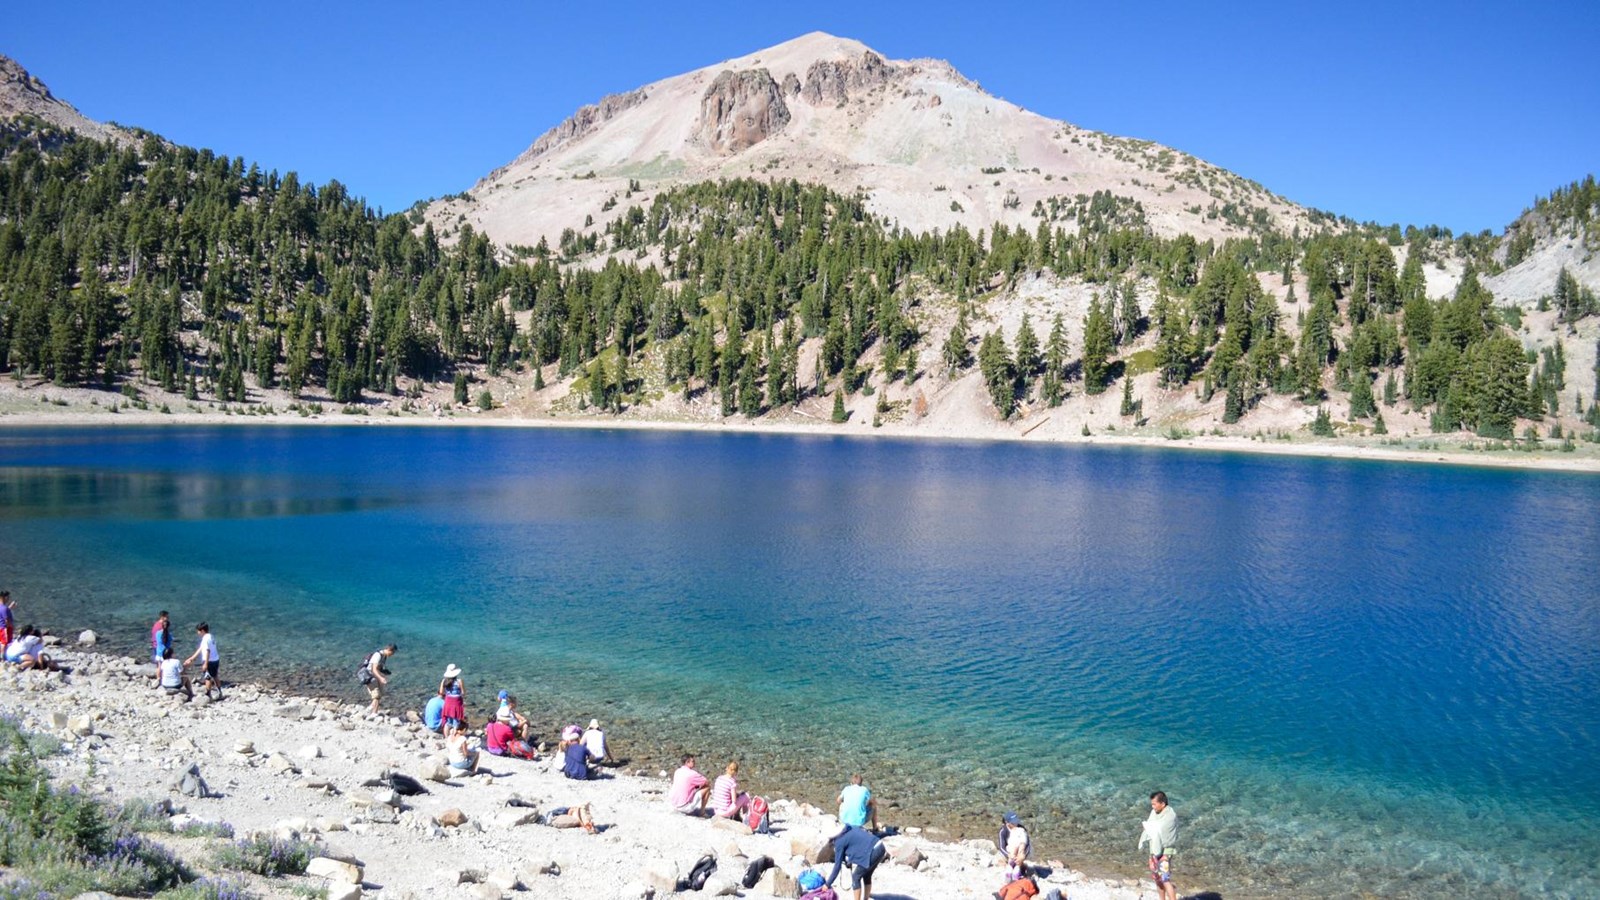 A dozen people spread out along the rocky shore of an alpine lake.